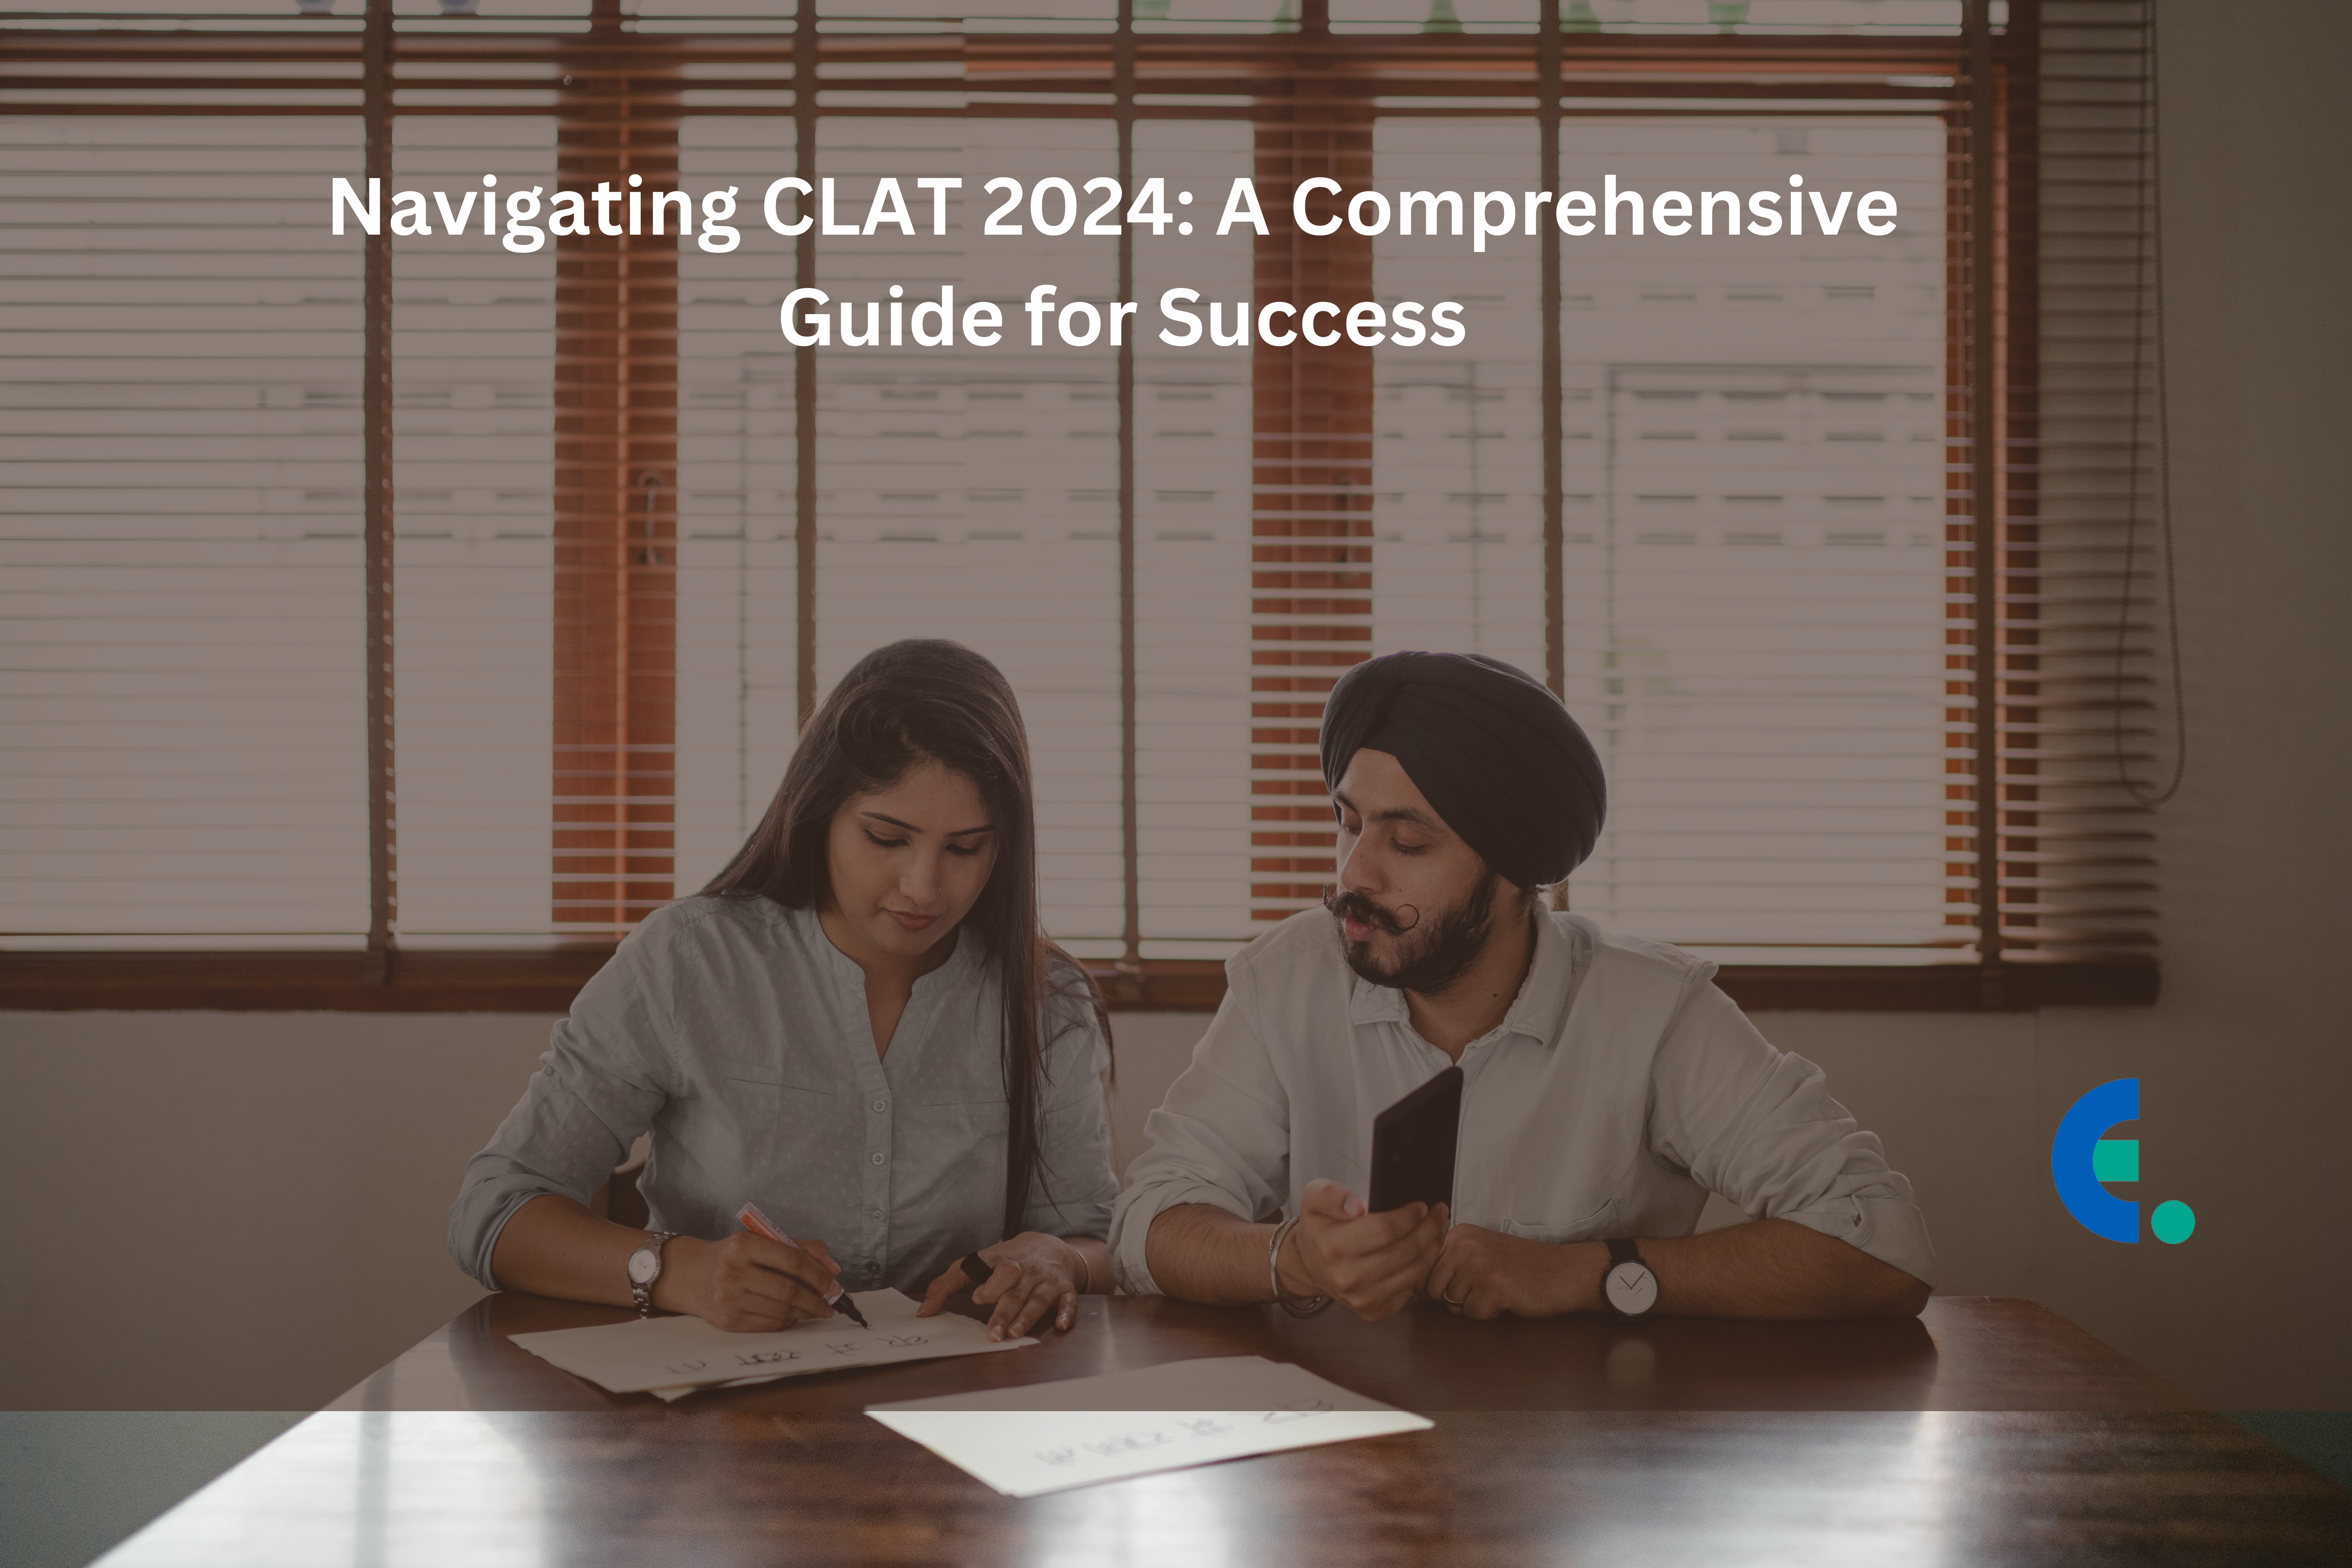 Navigating CLAT 2024: A Comprehensive Guide for Success